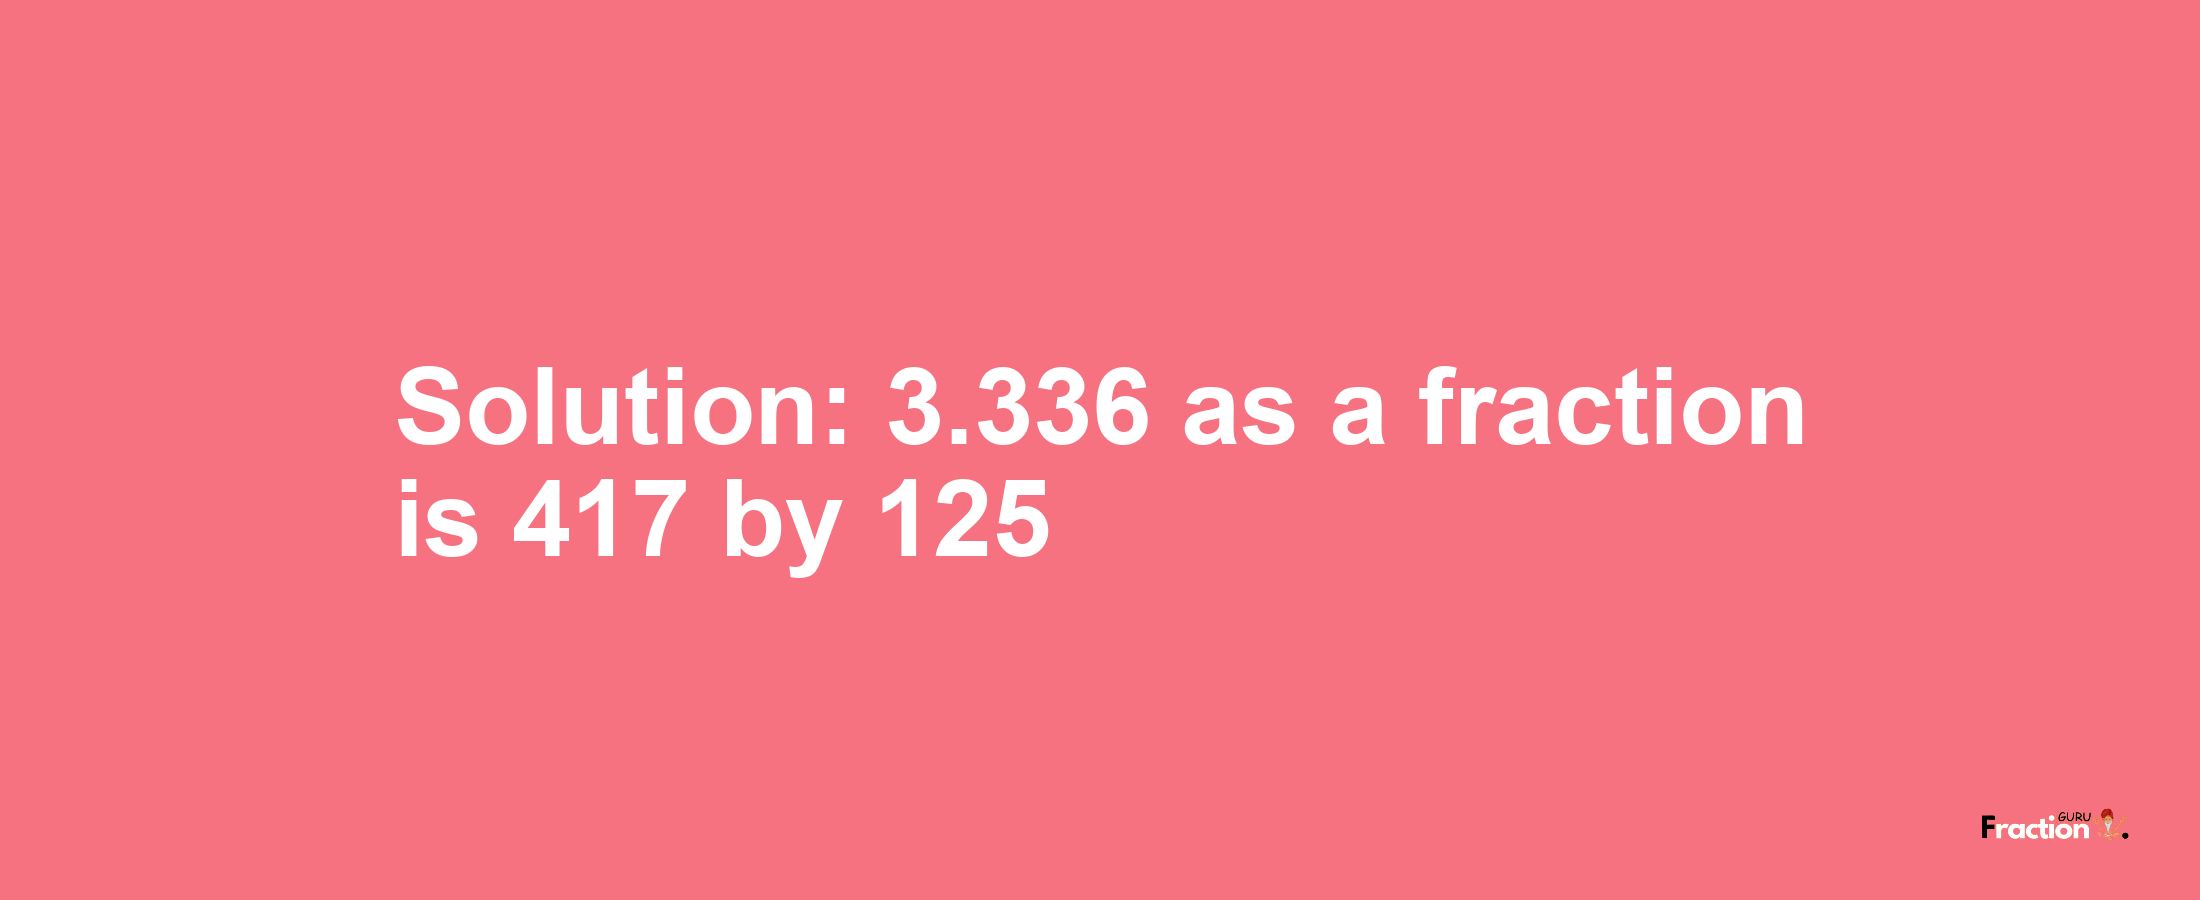 Solution:3.336 as a fraction is 417/125